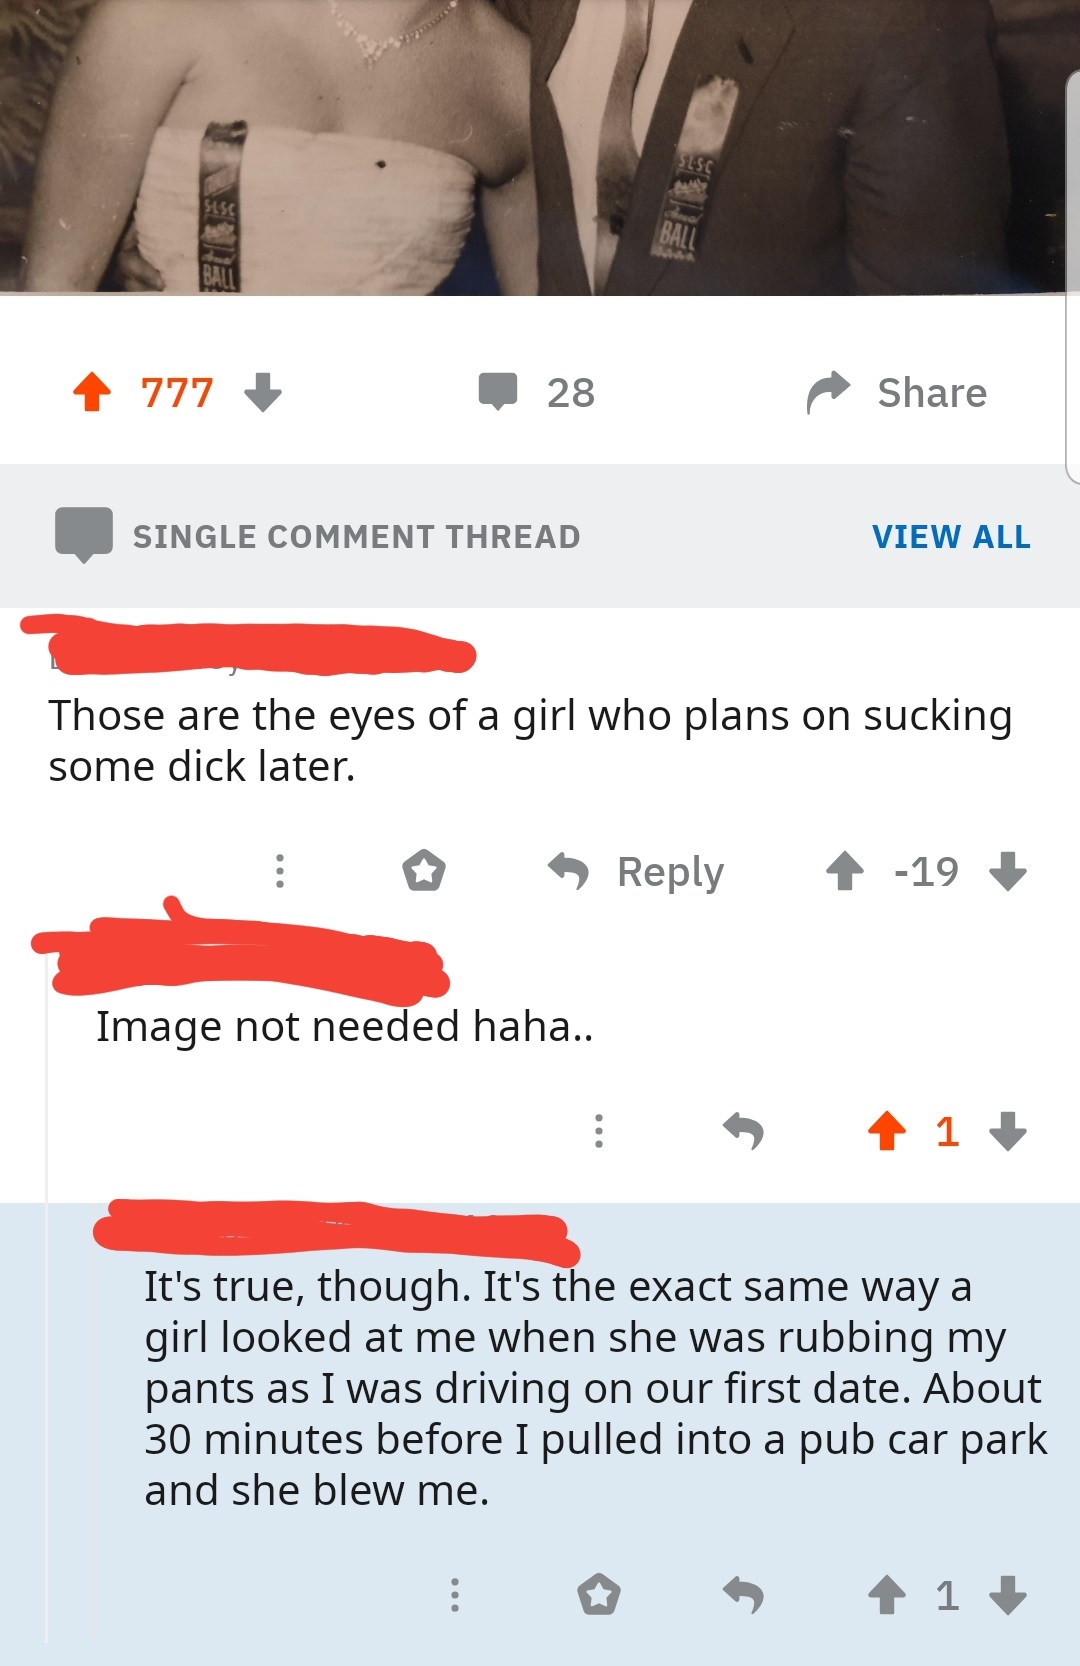 screenshot - 4 777 28 Single Comment Thread View All Those are the eyes of a girl who plans on sucking some dick later. 19 Image not needed haha.. 41 It's true, though. It's the exact same way a girl looked at me when she was rubbing my pants as I was dri